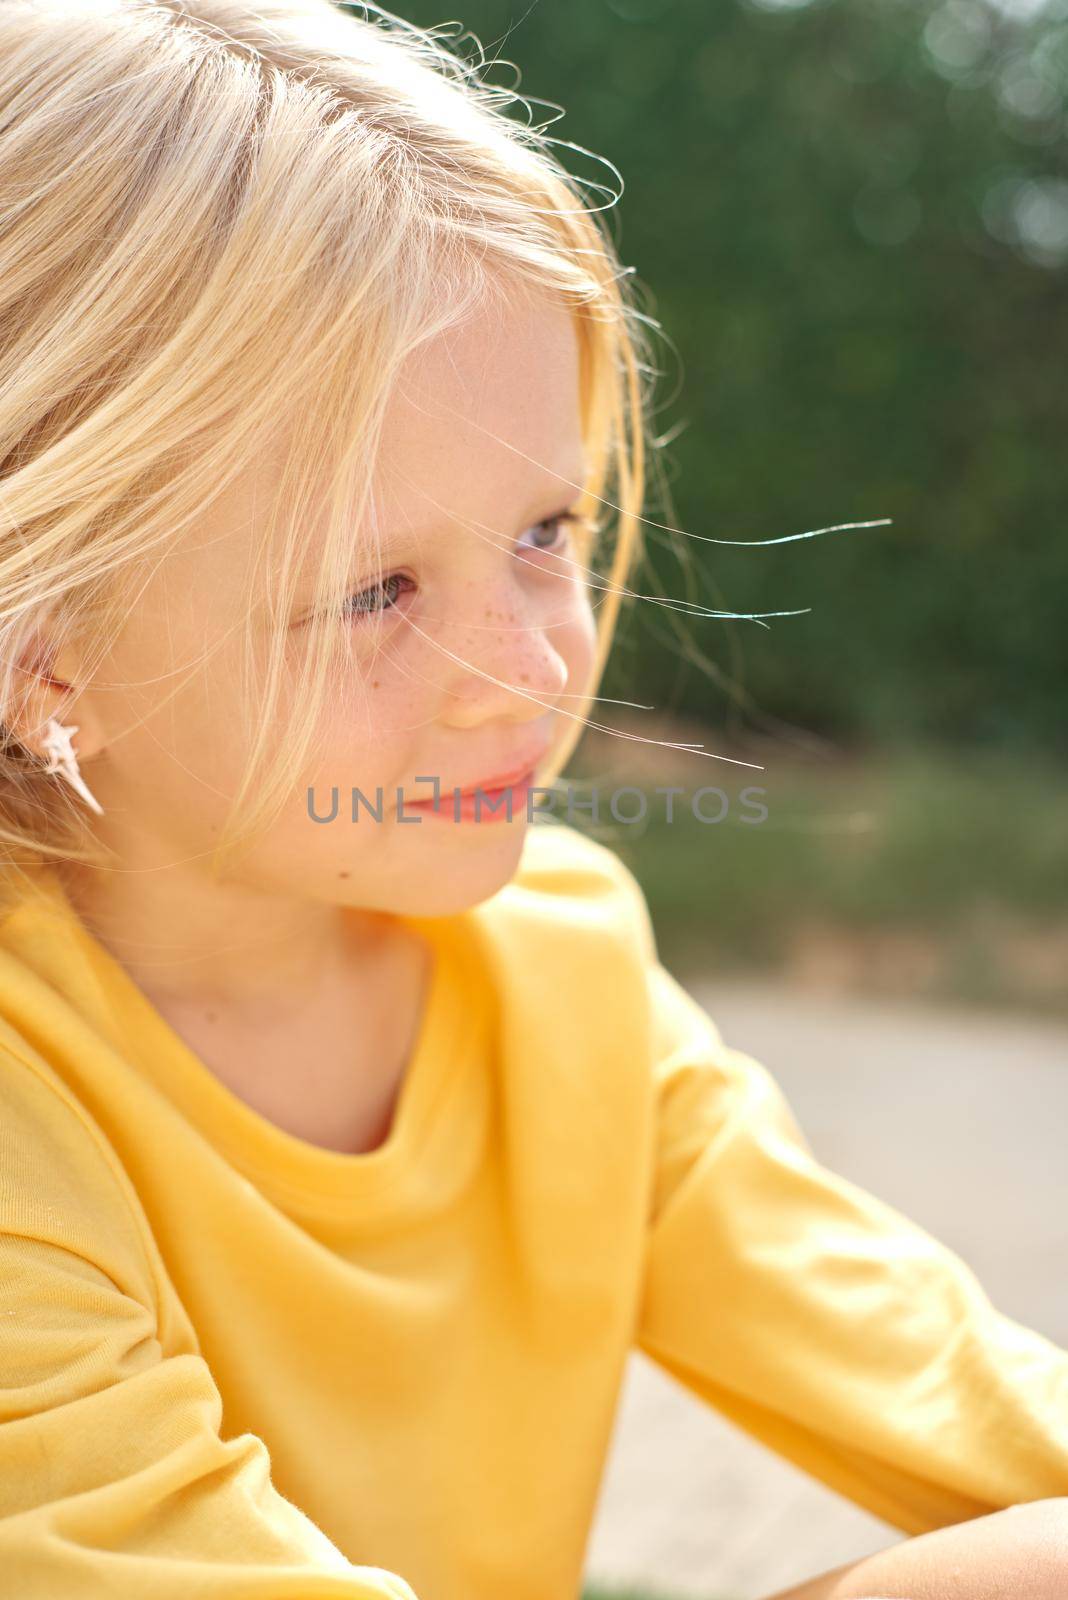 Pretty beautiful blonde child girl sitting before green wall. Smiling preschool girl 5 - 6 years old in yellow t shirt looking at camera. Lifestyle. Beauty. Summer vacation. Leisure. People